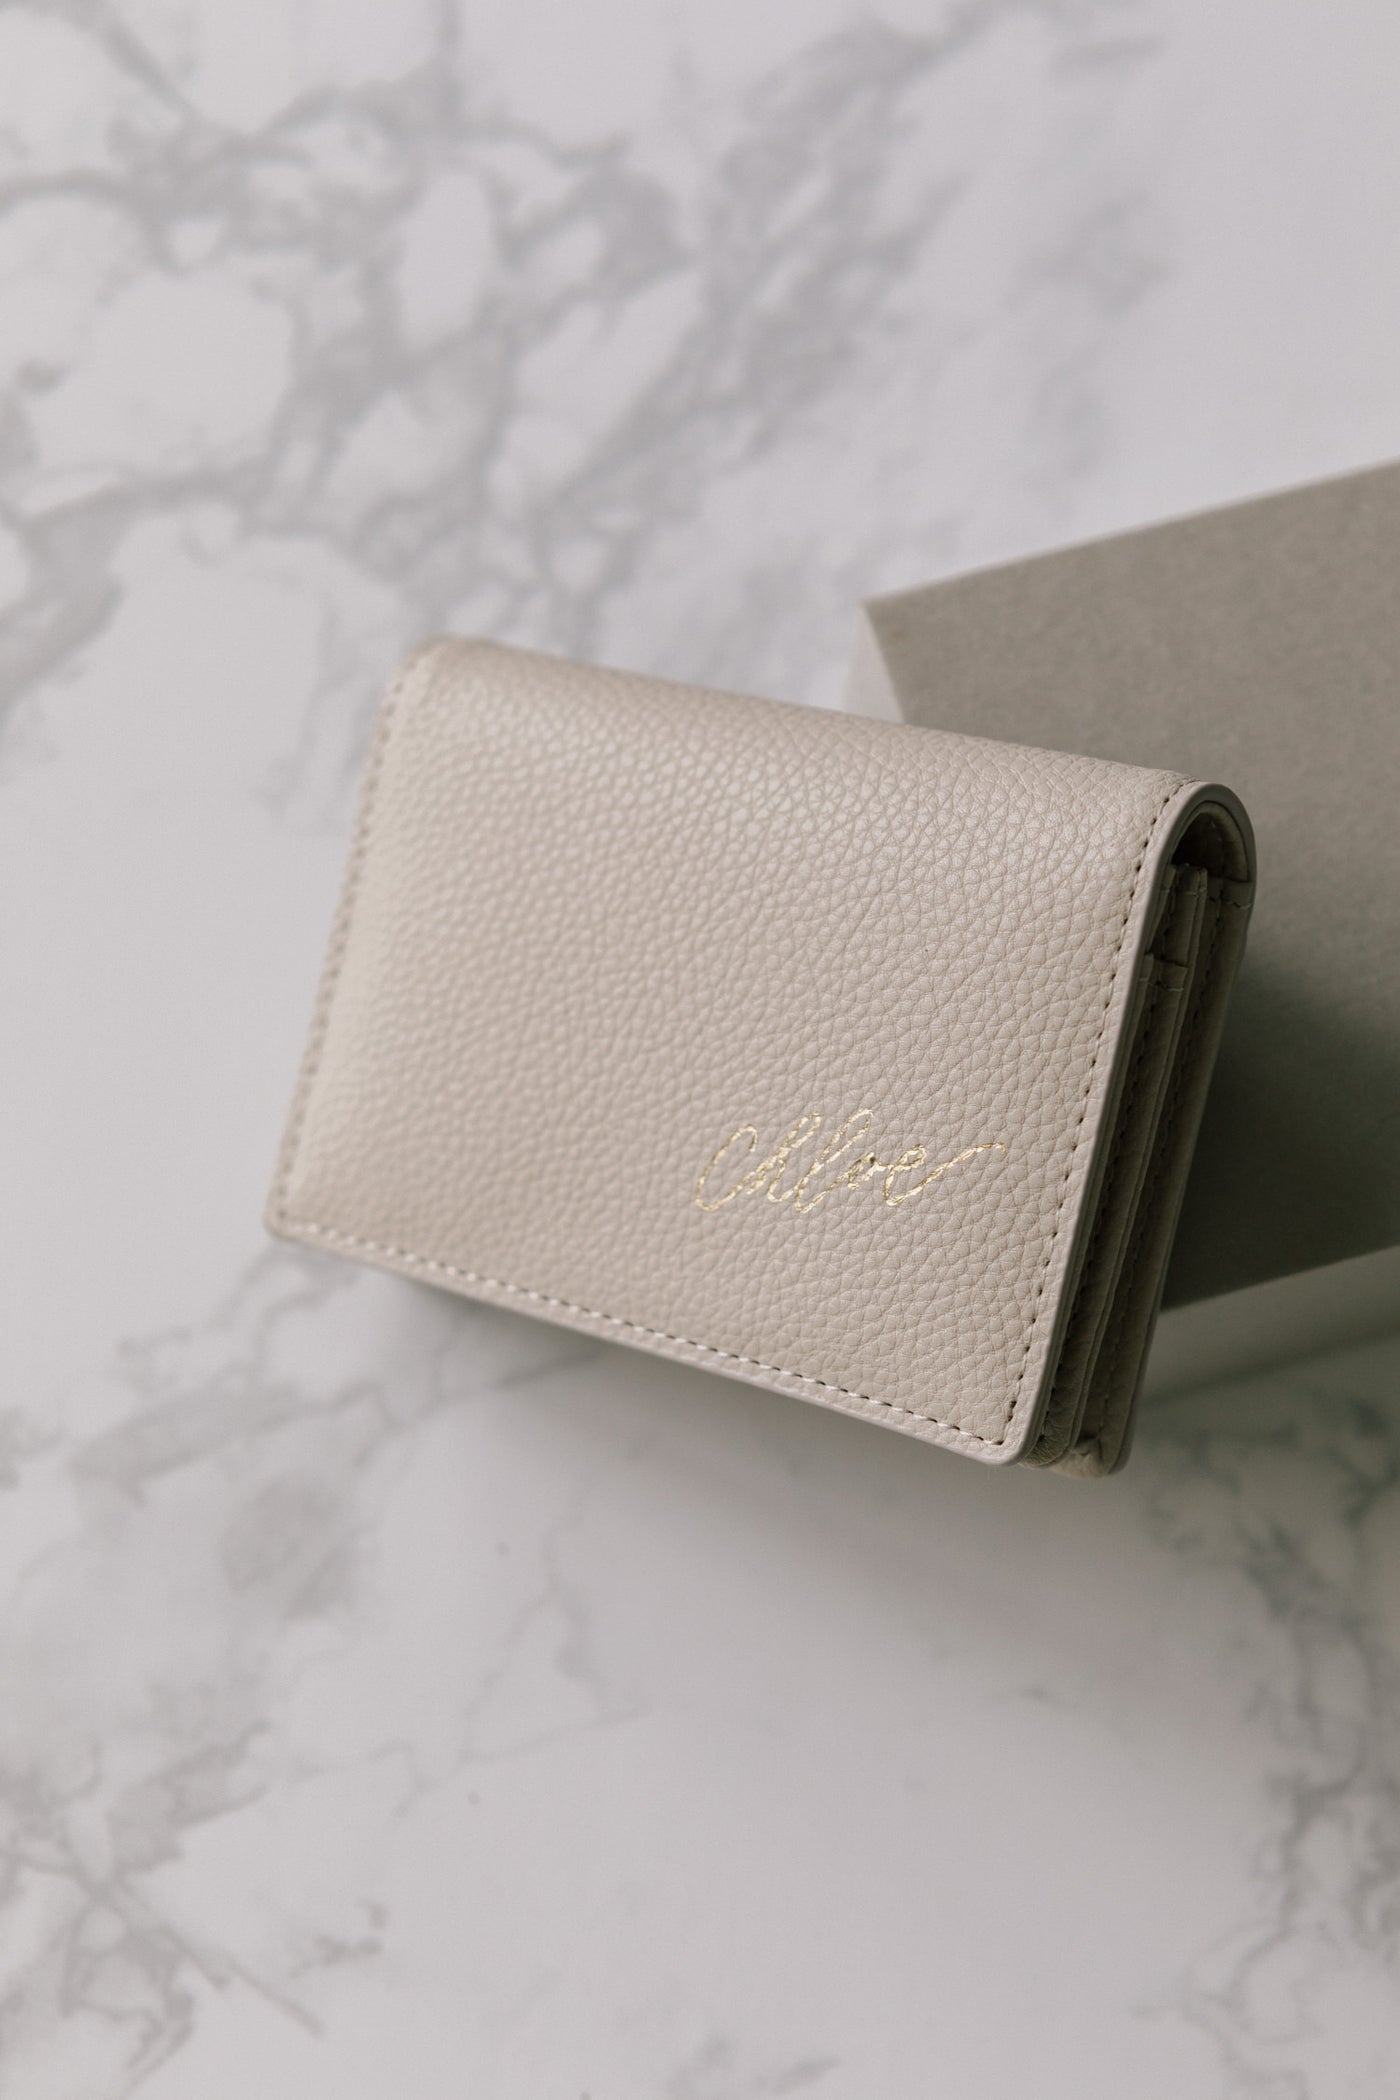 Lark and Ives / Vegan Leather Accessories / Small Accessories / Wallet / Mini Wallet / Card Case / Card Holder / Button snap closure / Fold Wallet / Gold Foil Personalized Light Beige Card Holder